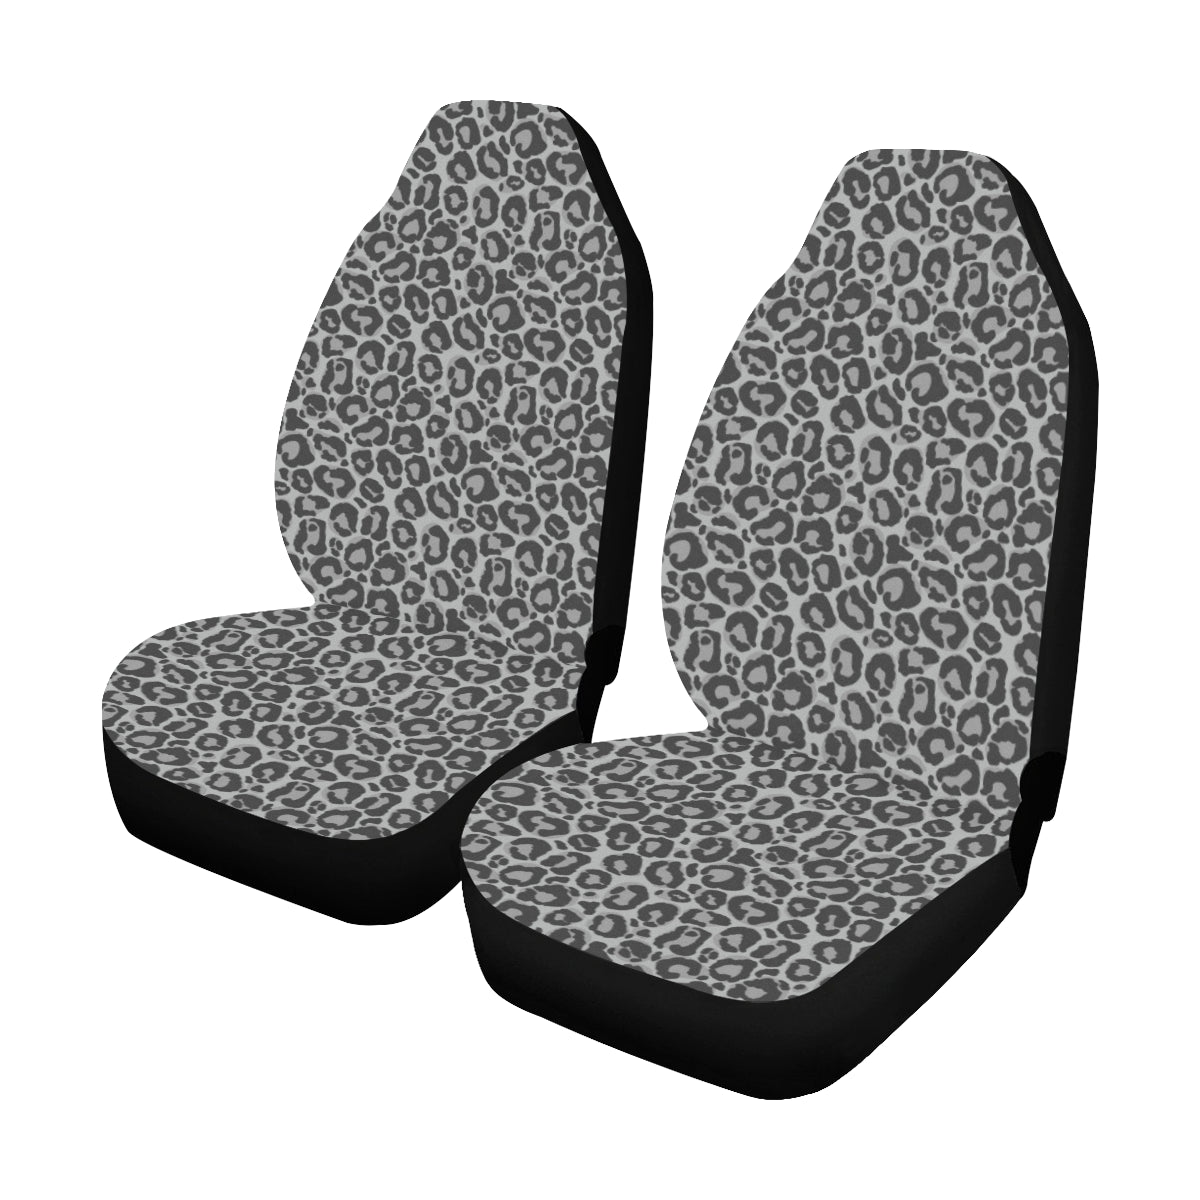 Leopard Car Seat Covers for Vehicle 2 pc, Grey Animal Print Black Pattern Front Seat Covers, Car SUV Gift Her Protector Accessory Decoration Starcove Fashion